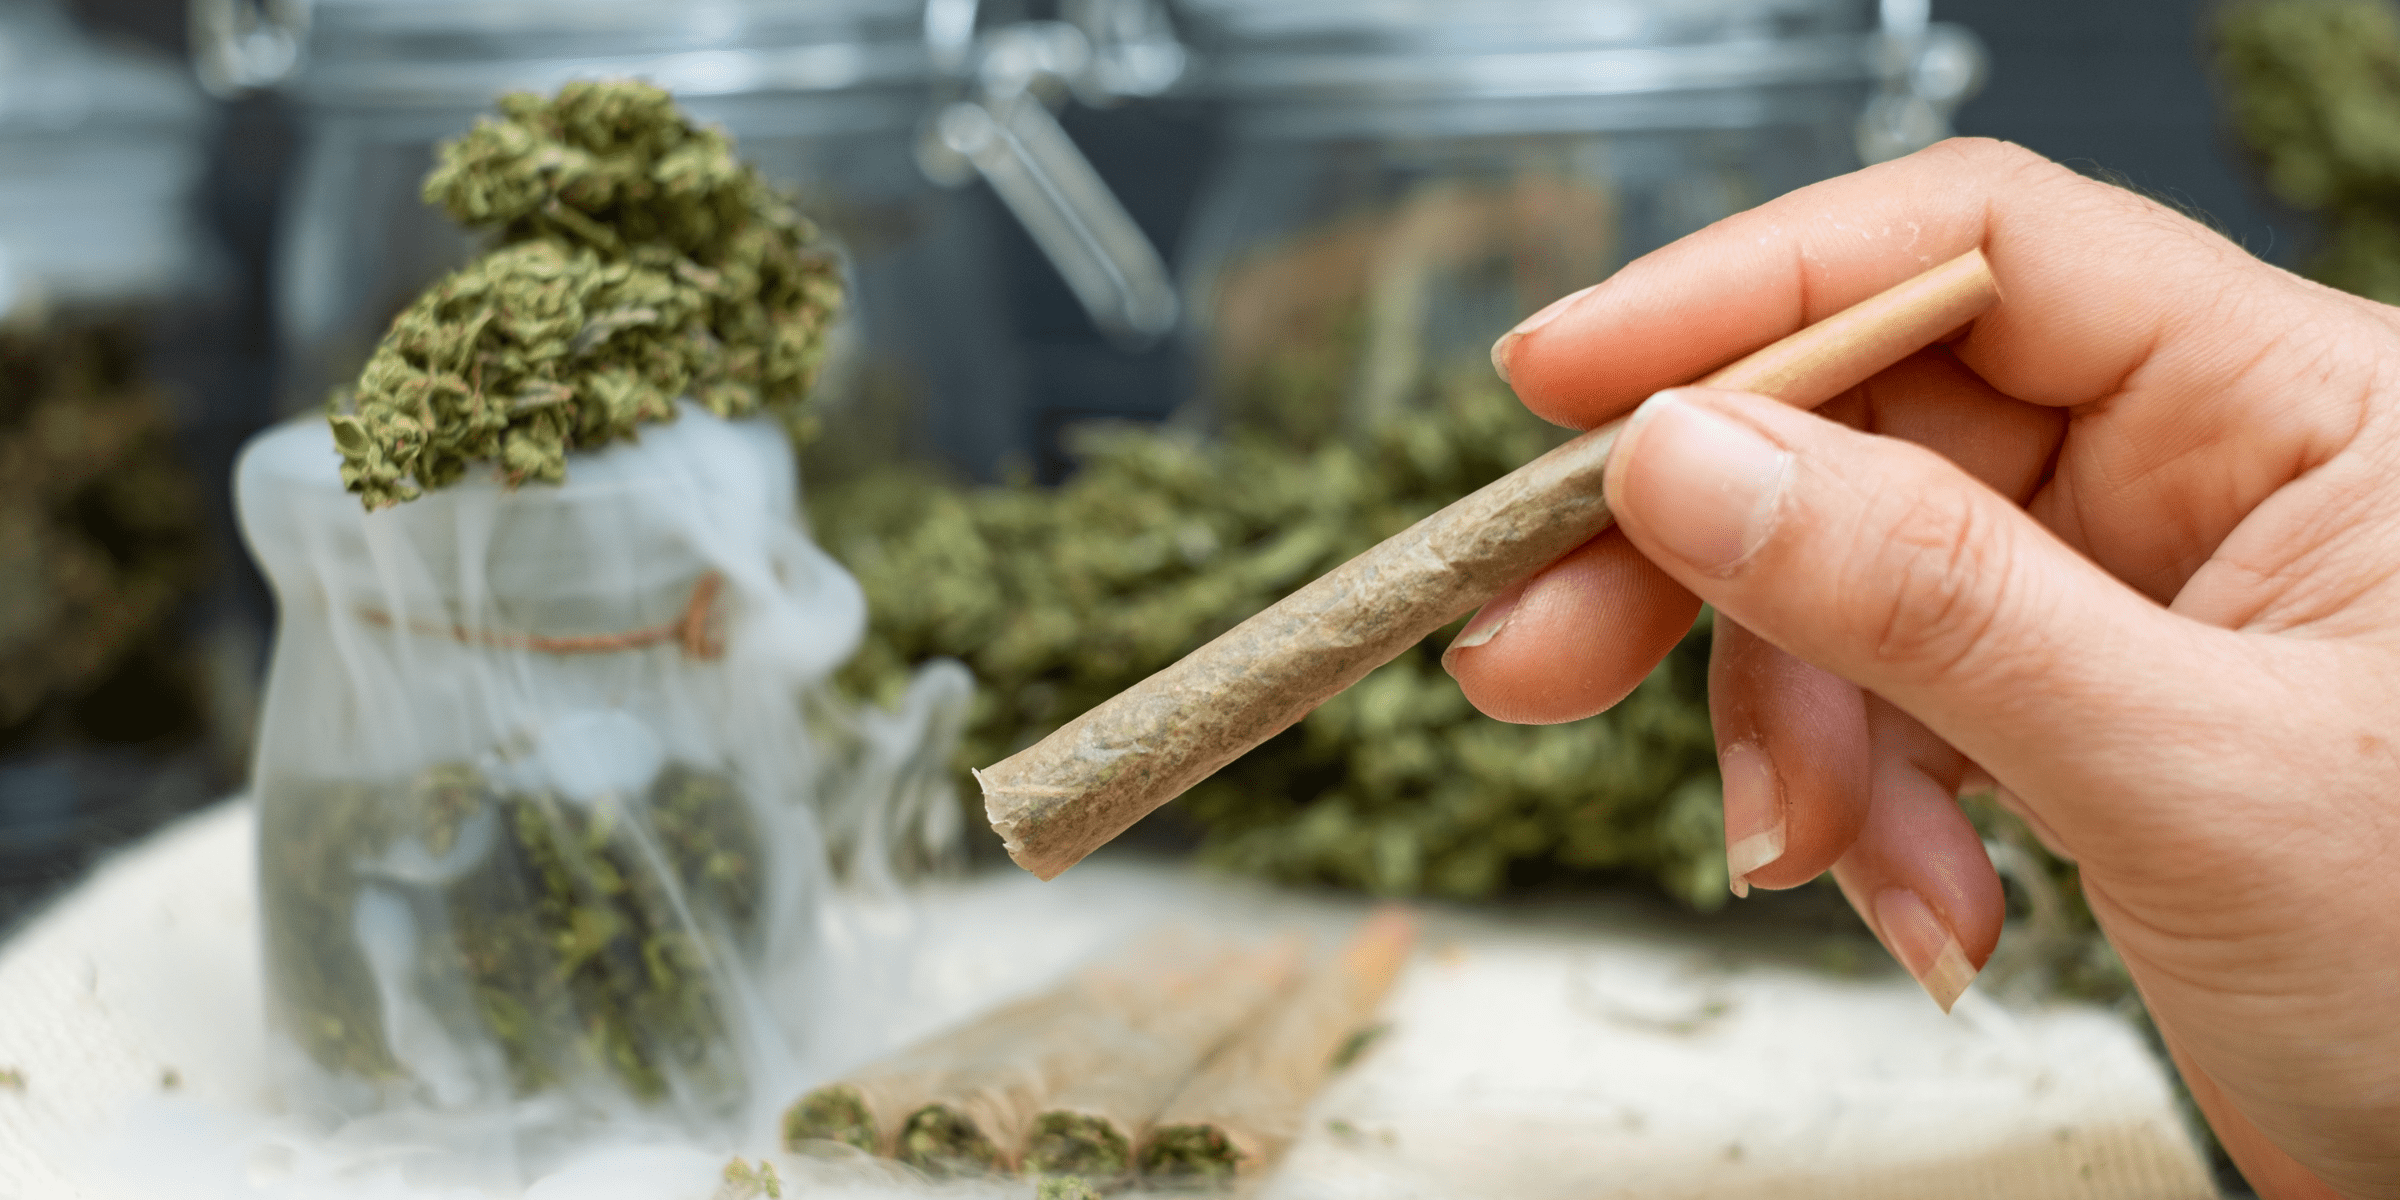 marijuana joint cannabis strains used for beating insomnia or sleep problems